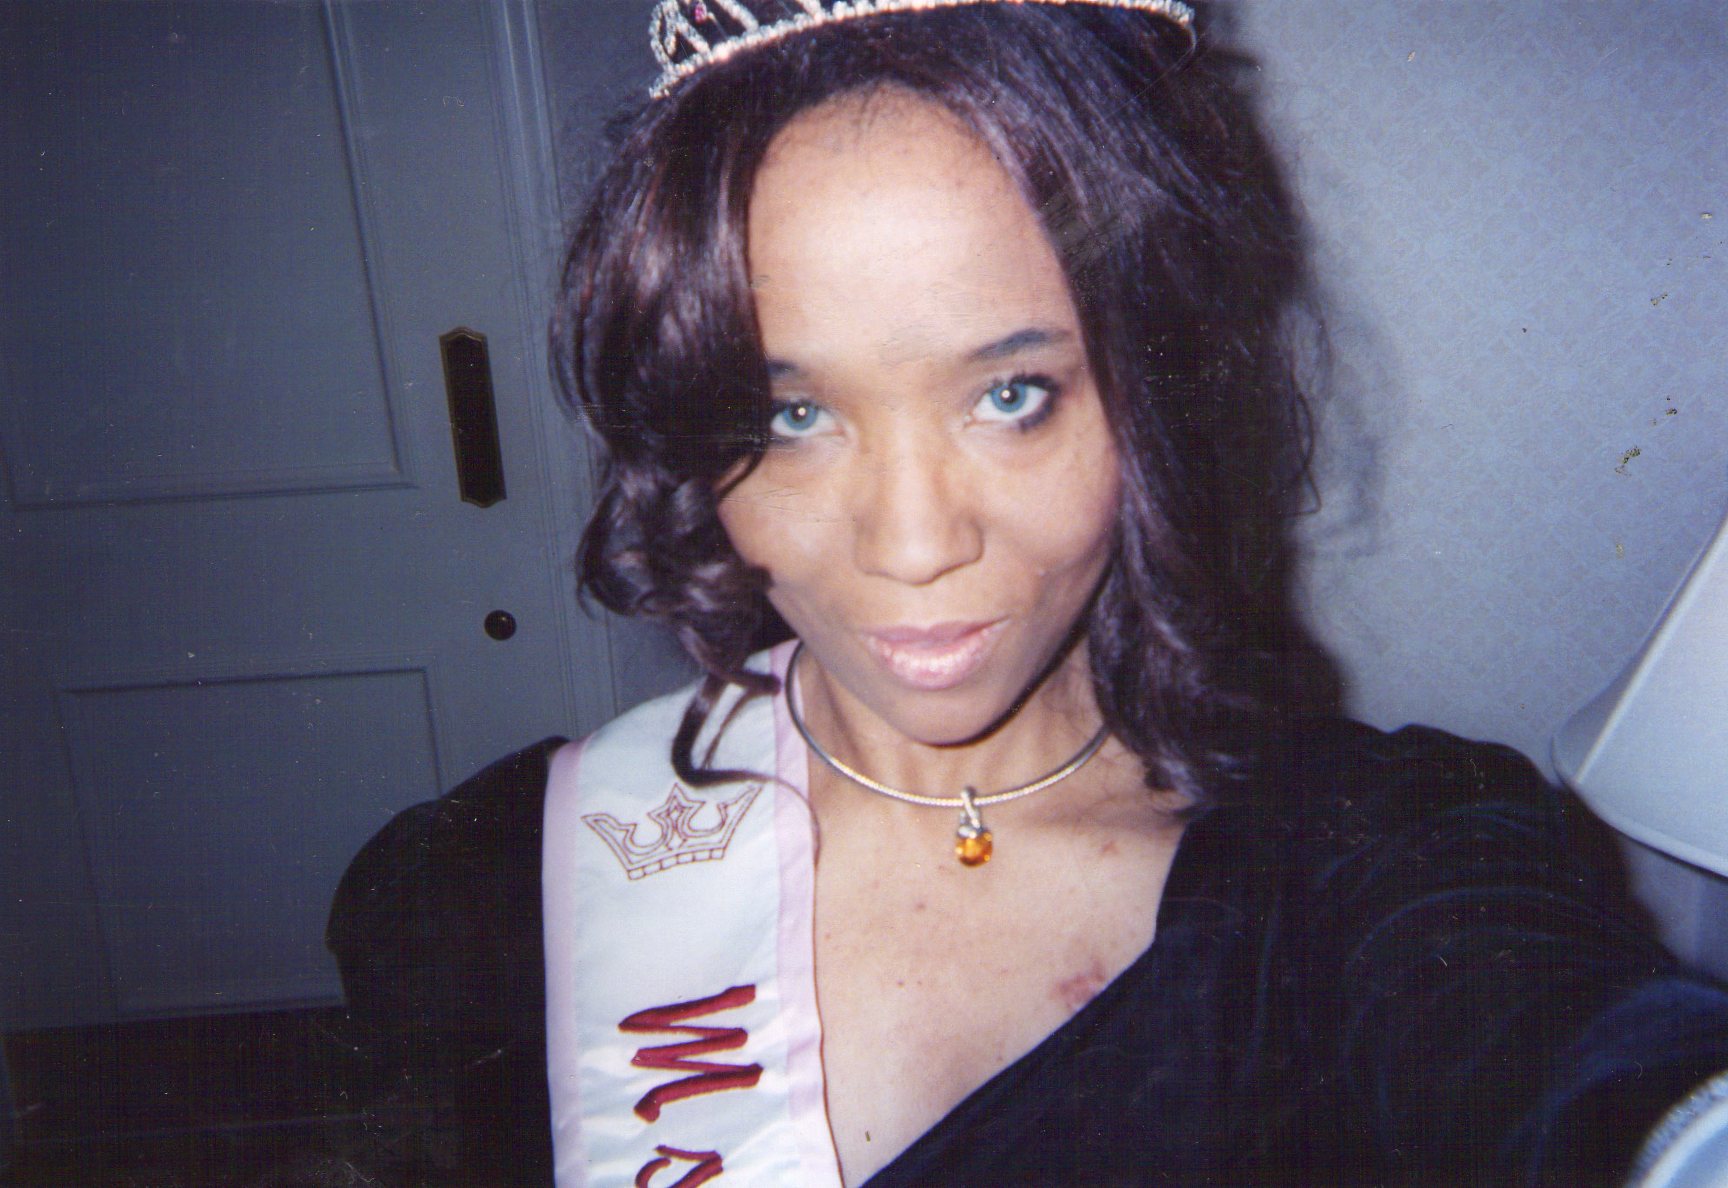 Ms. Pennsylvania 2004 Maria Frisby was a special guest and wore a $1000 necklace that was auctioned off at a Chocolate Ball for charity.